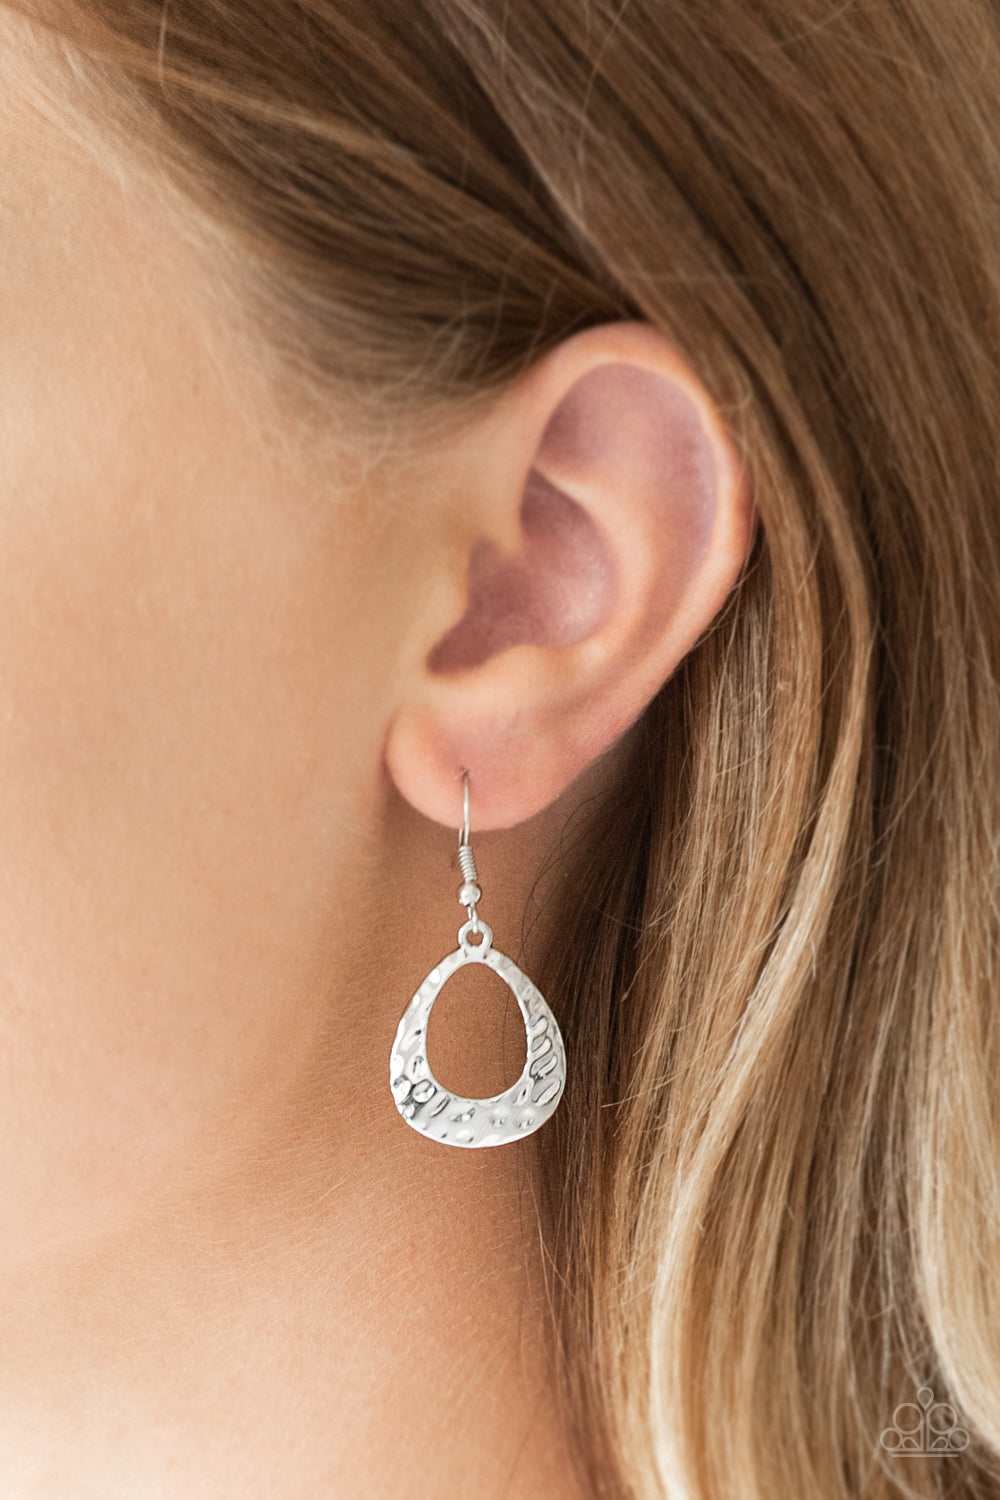 Paparazzi earring - Radiantly Rugged - Silver